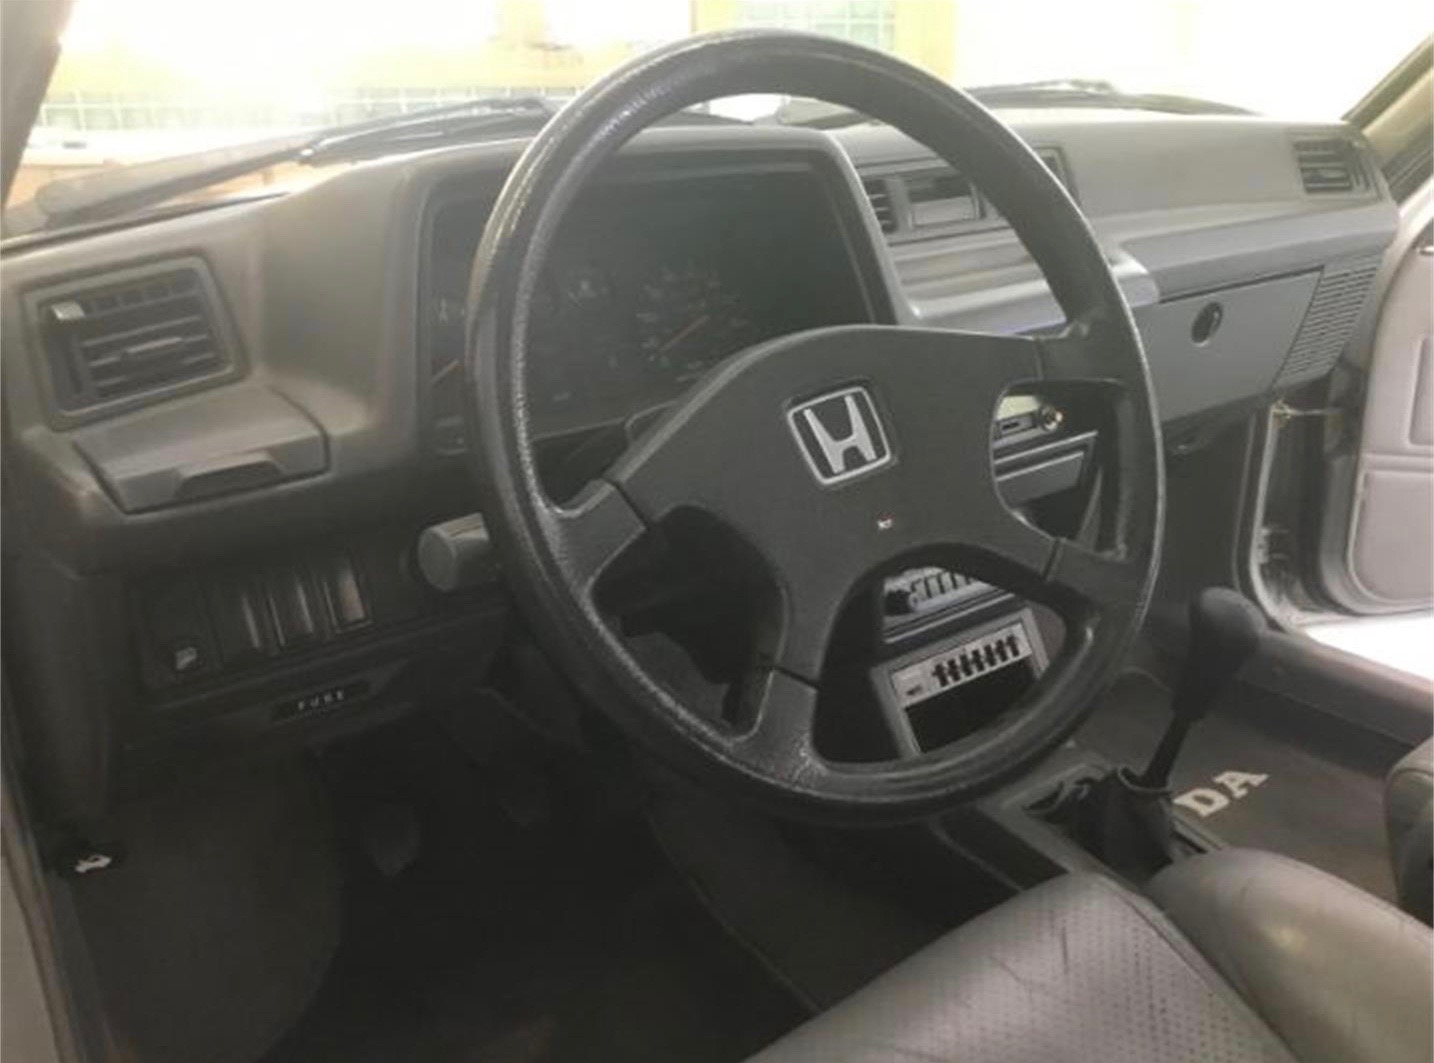 Civic, This 1982 Honda Civic is a time-capsule example, ClassicCars.com Journal